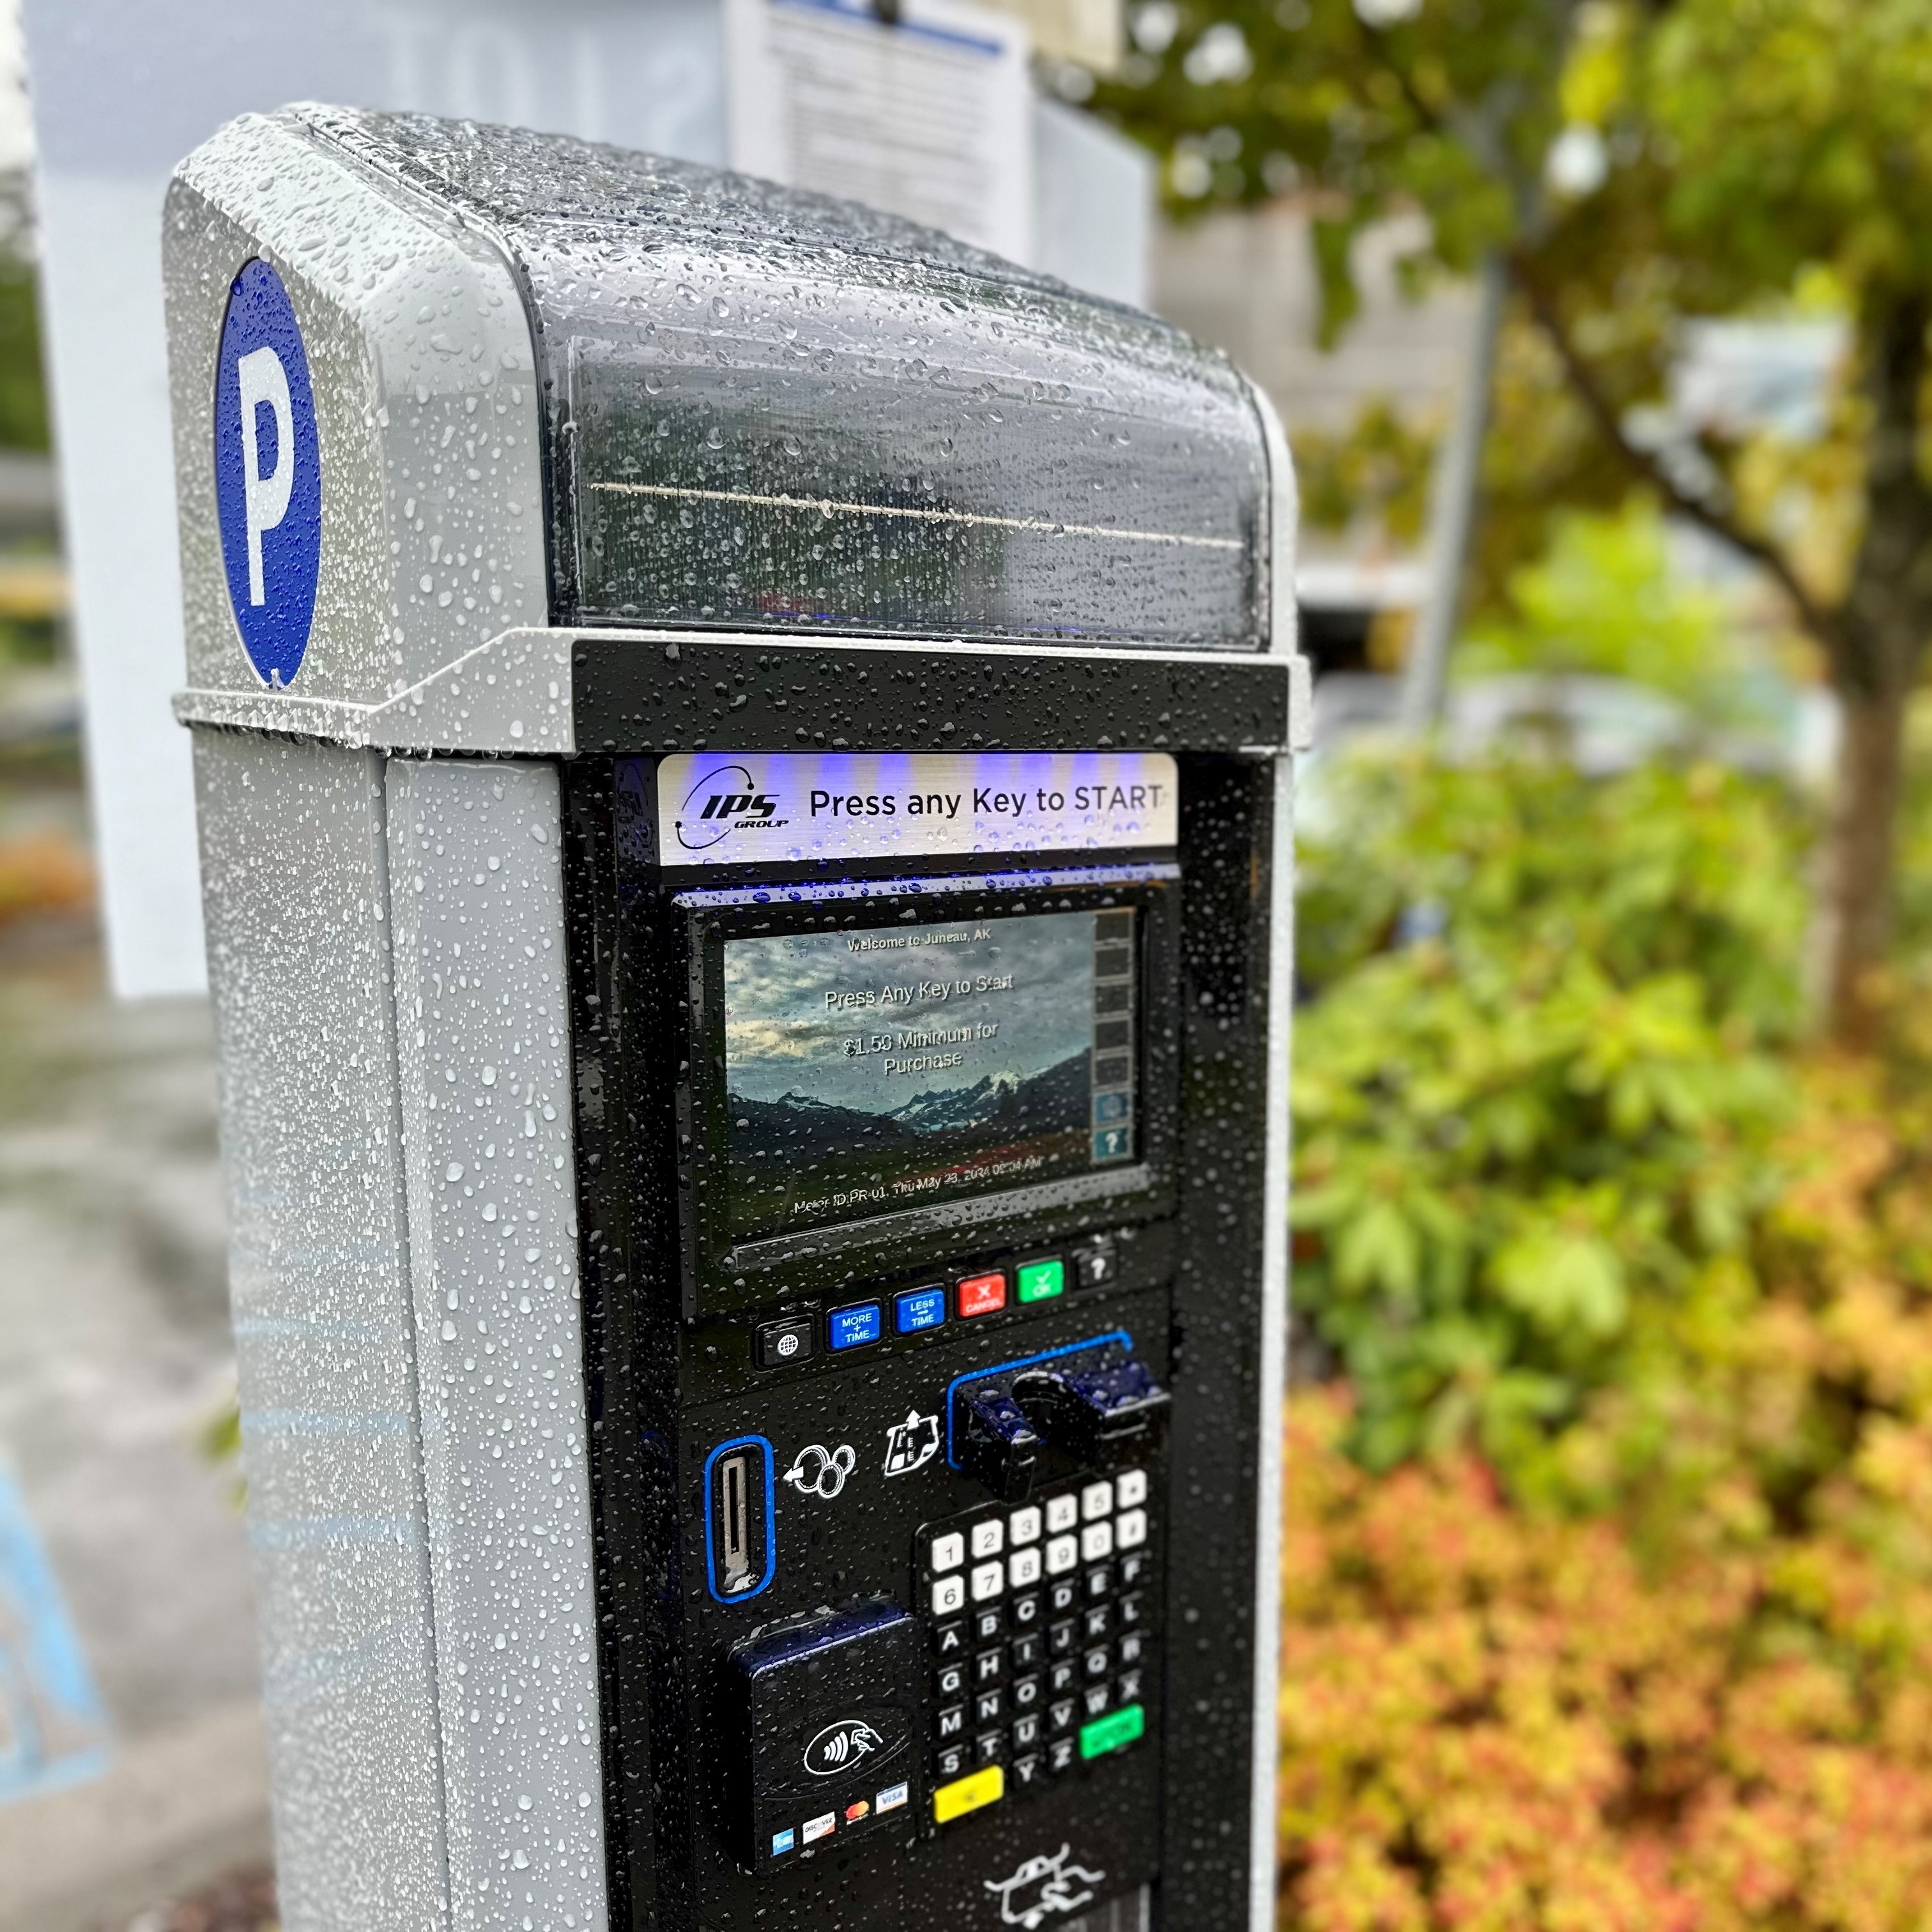 Close up photo of parking paystation